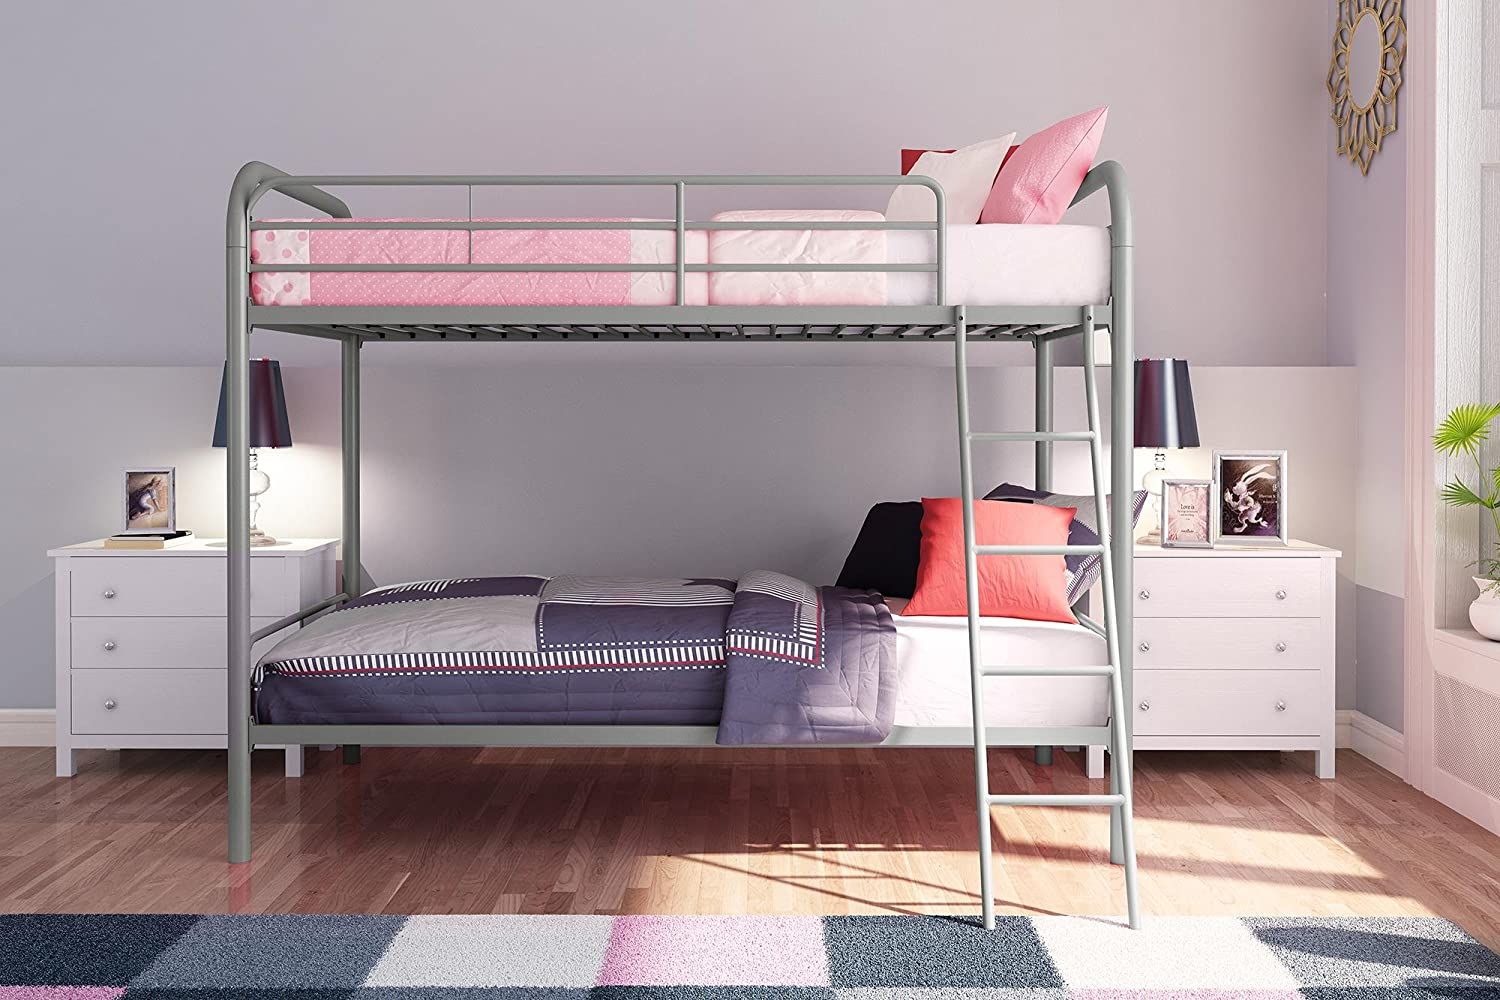 8 Best Bunk Beds 2020 The Strategist, Appropriate Age For Bunk Beds